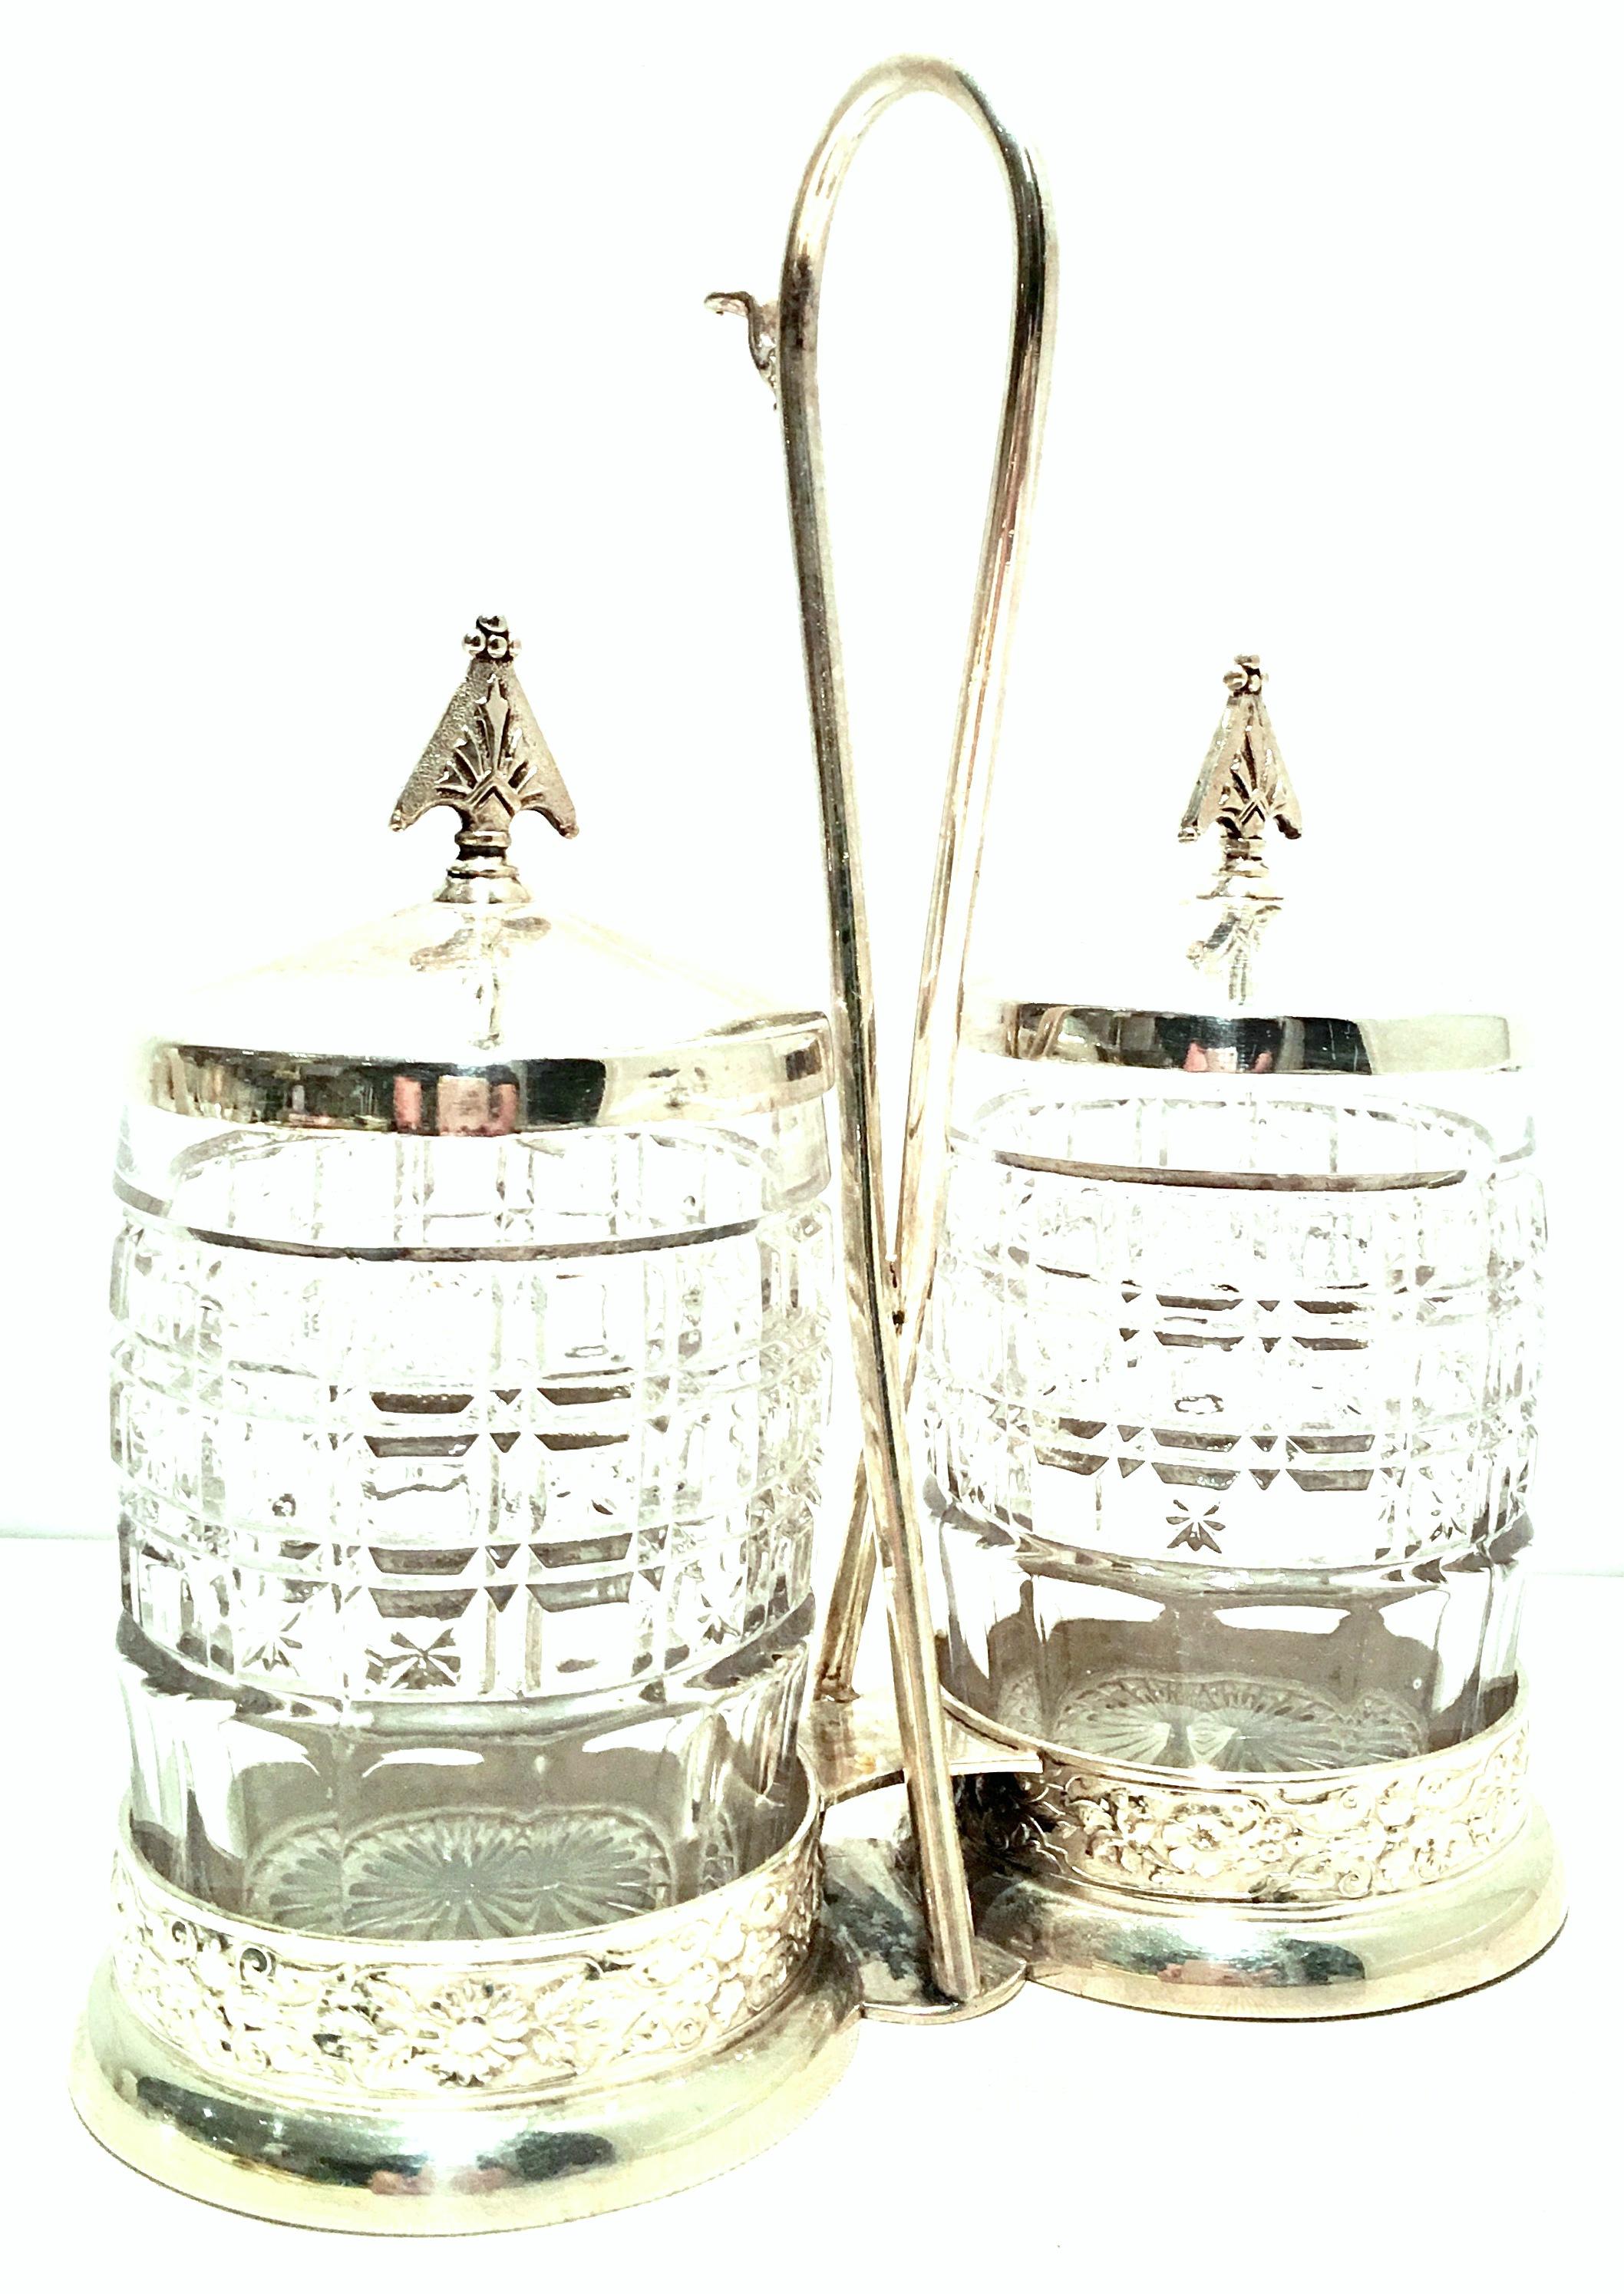 20th century cut crystal & silver plate cruet set of three pieces. This lovely cut to clear crystal and silver plate three-piece cruet set includes, two cut crystal cruet or condiment jars with silver plate lids and one silver plate caddy.
Each jar